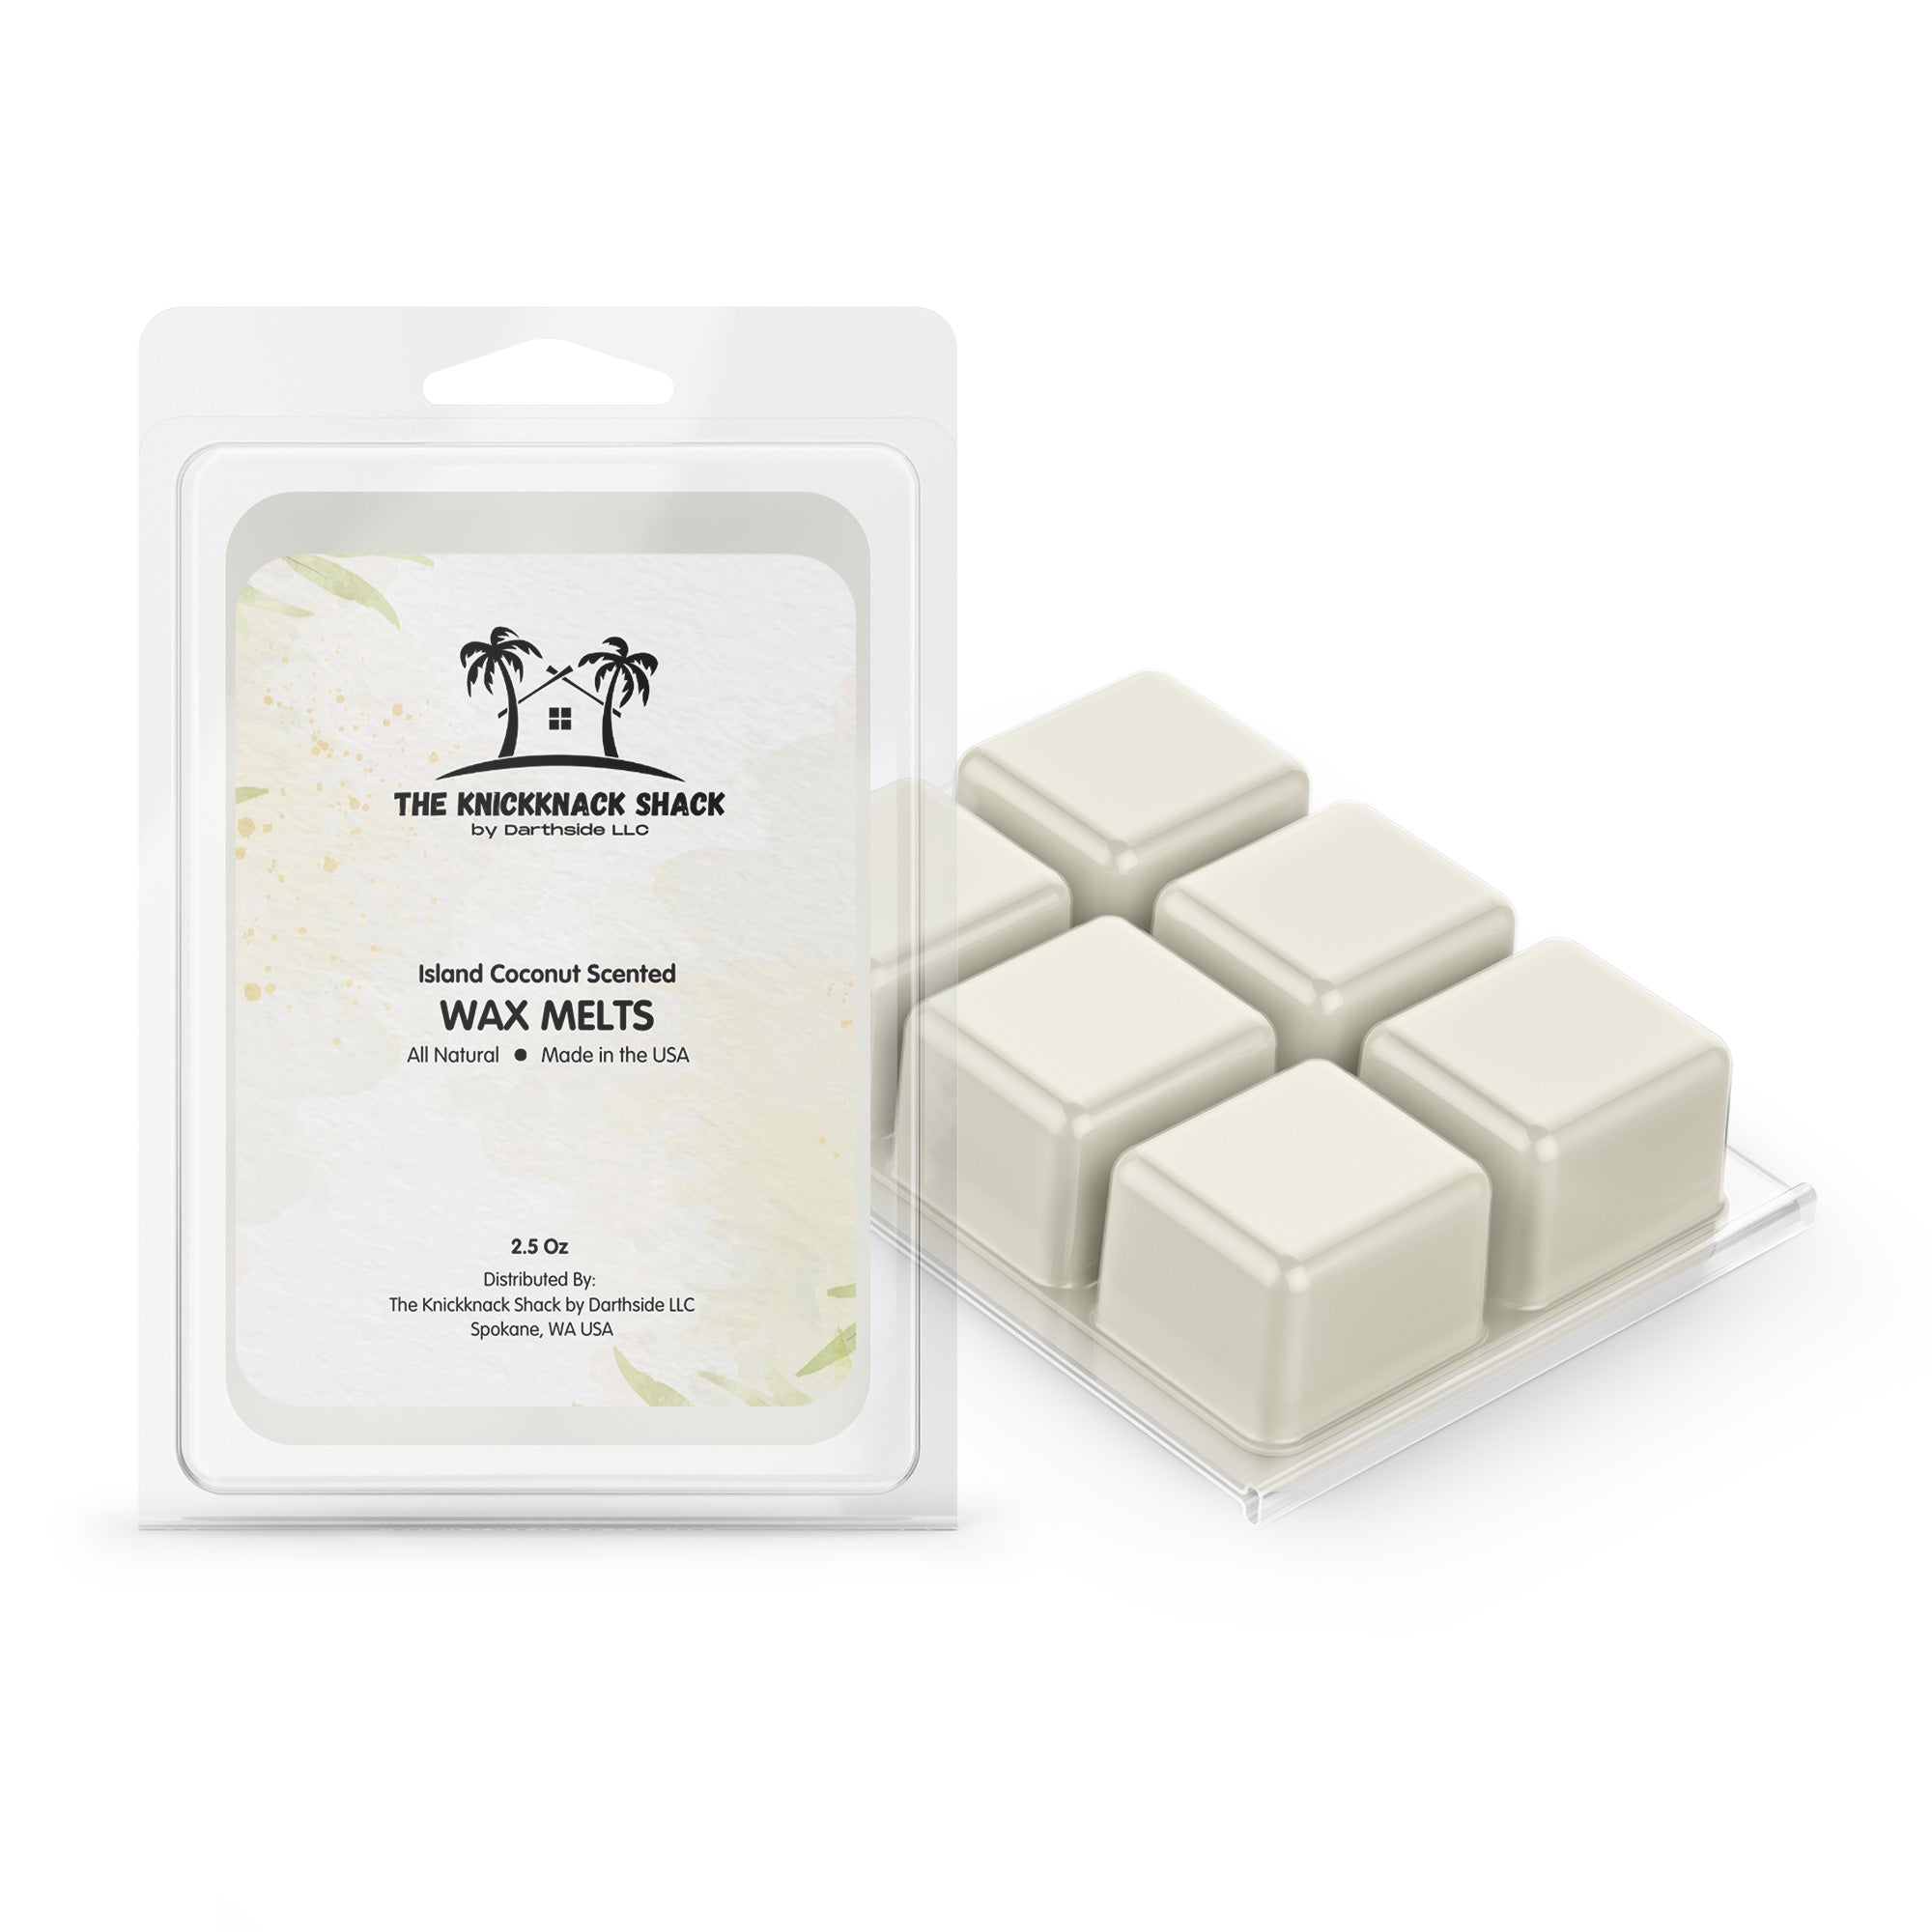 Island Coconut Scented Wax Melts